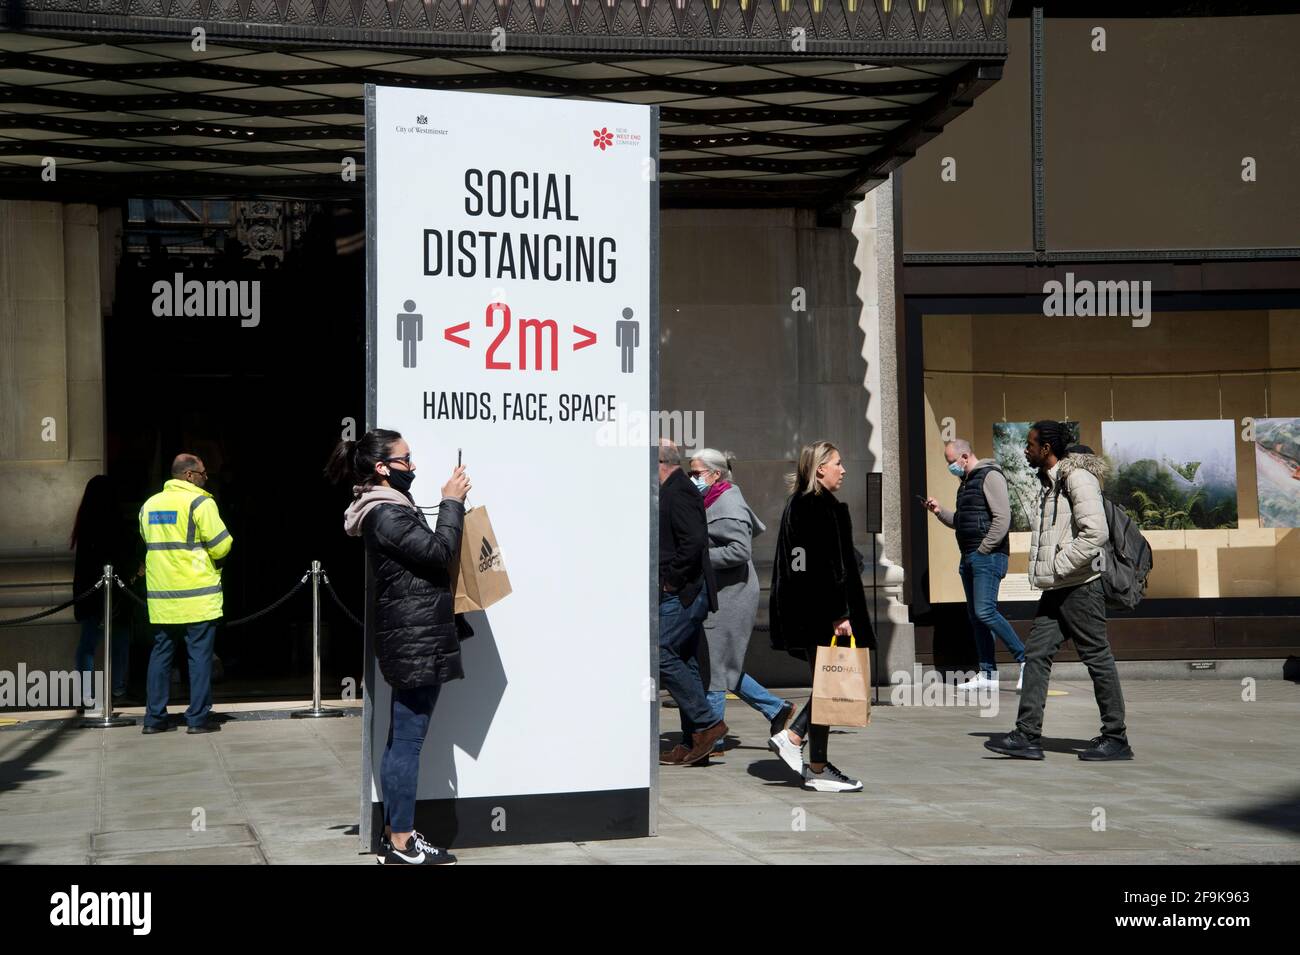 London, England, UK. Oxford Street, Selfridges, re-opened after lockdown 3. Sign reminding people to social distance and a woman taking a selfie. Stock Photo